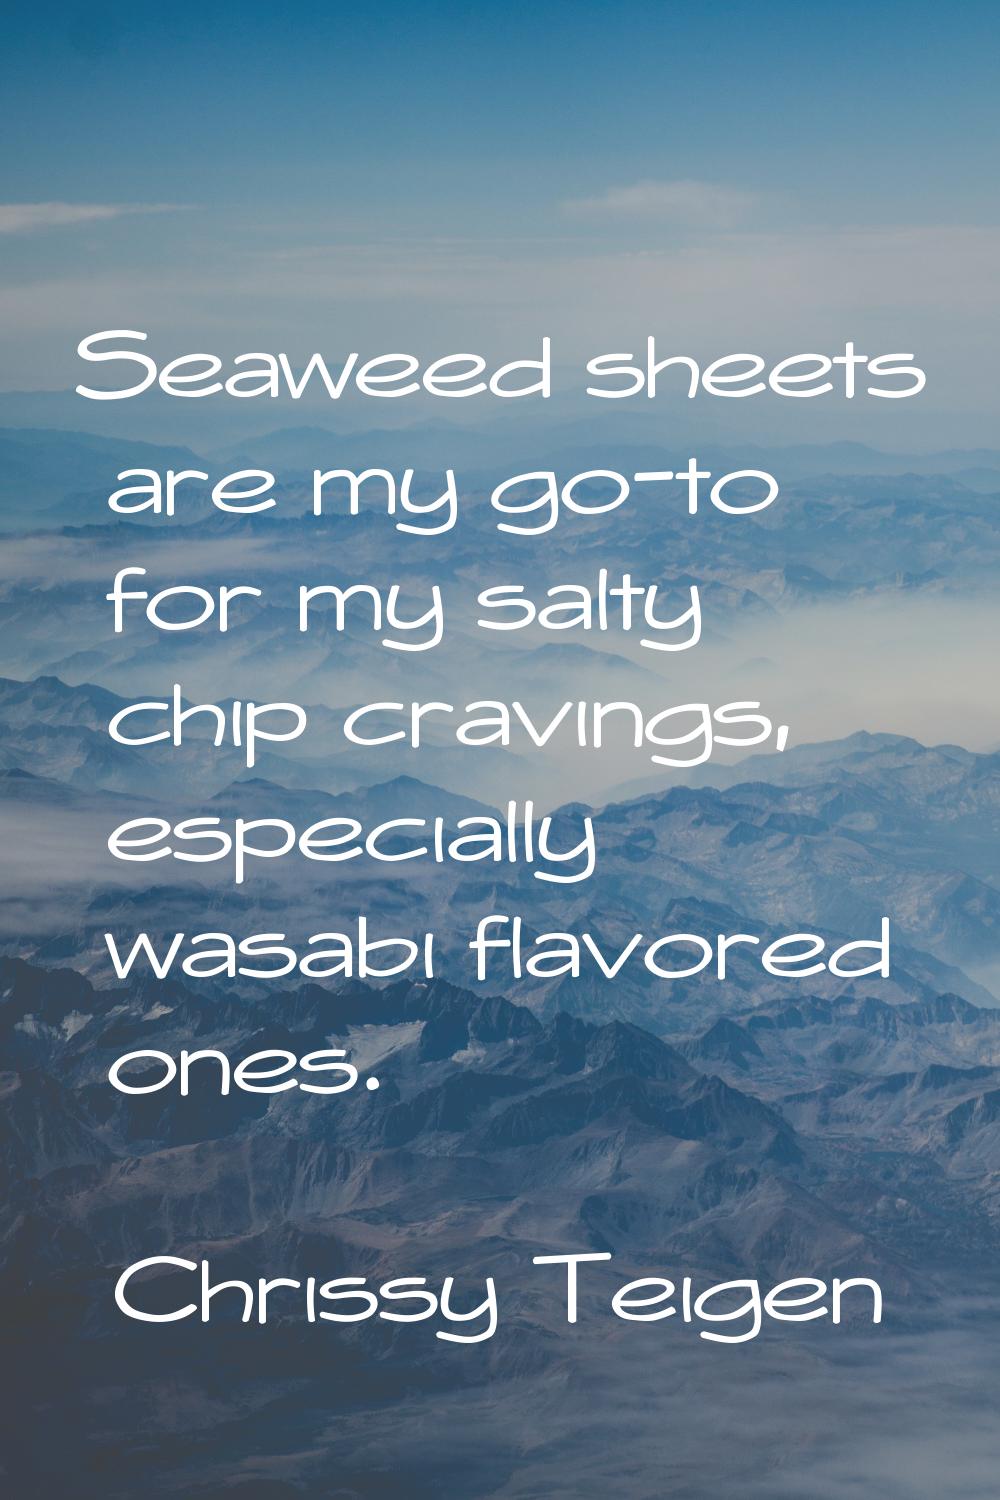 Seaweed sheets are my go-to for my salty chip cravings, especially wasabi flavored ones.